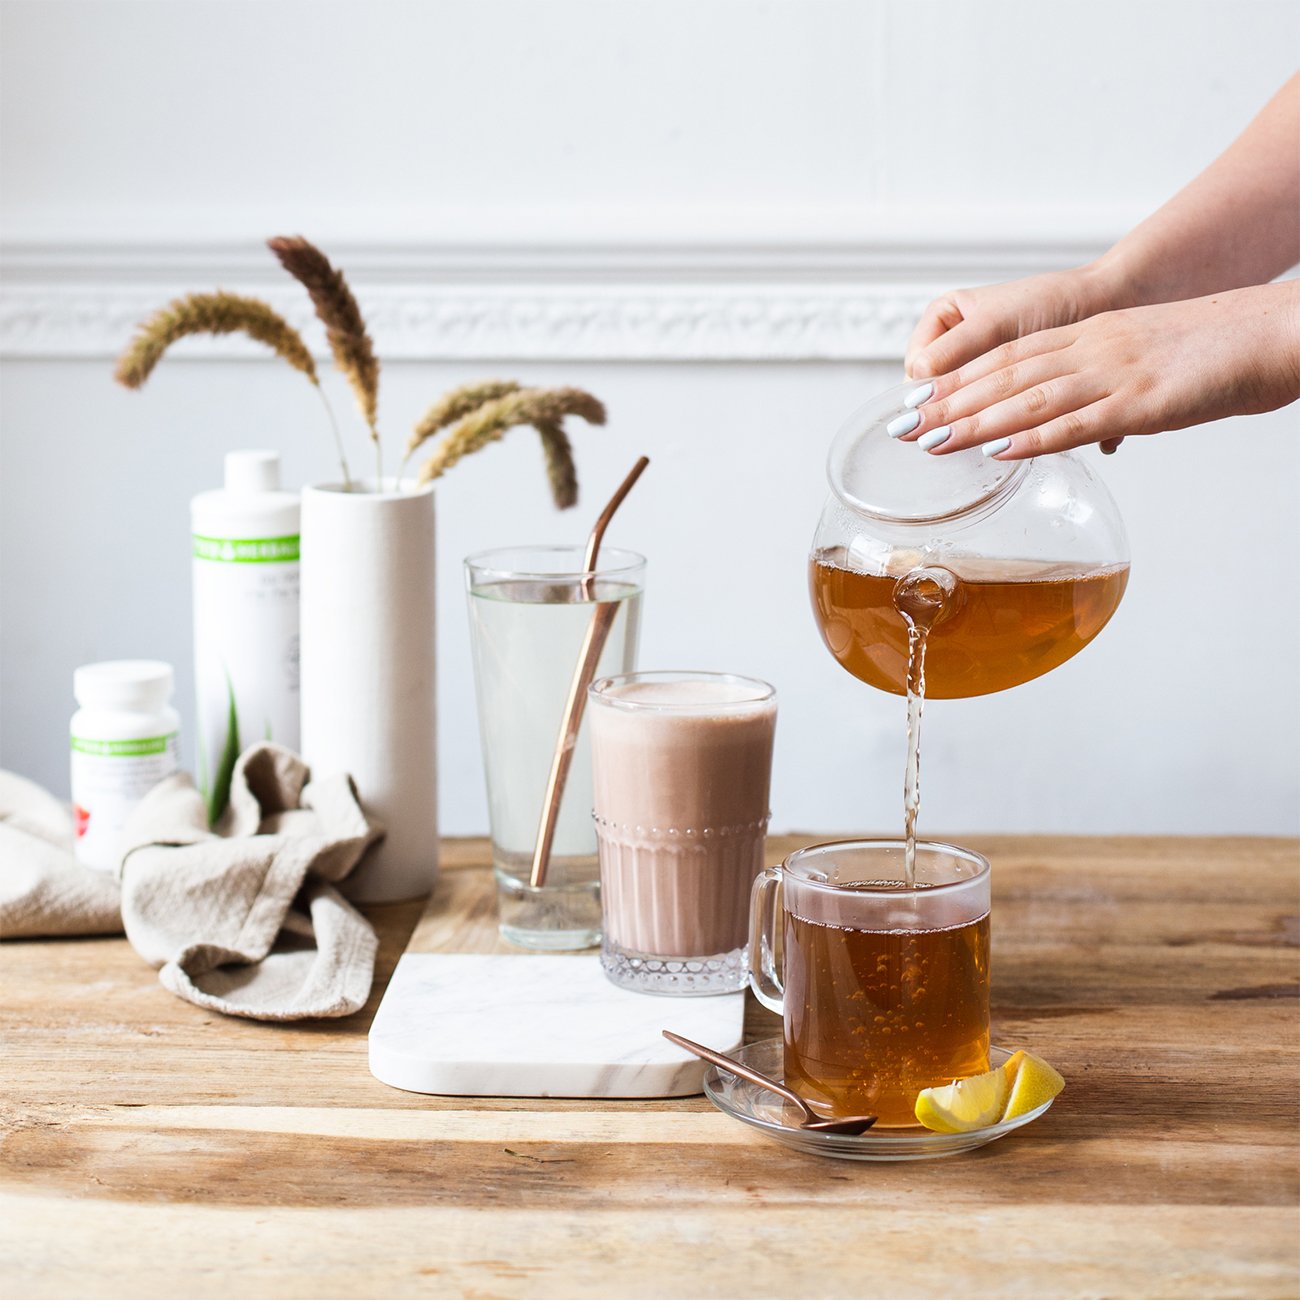 herbalife-nutrition-healthy-breakfast-and-hand-pouring-lemon-tea-in-a-cup